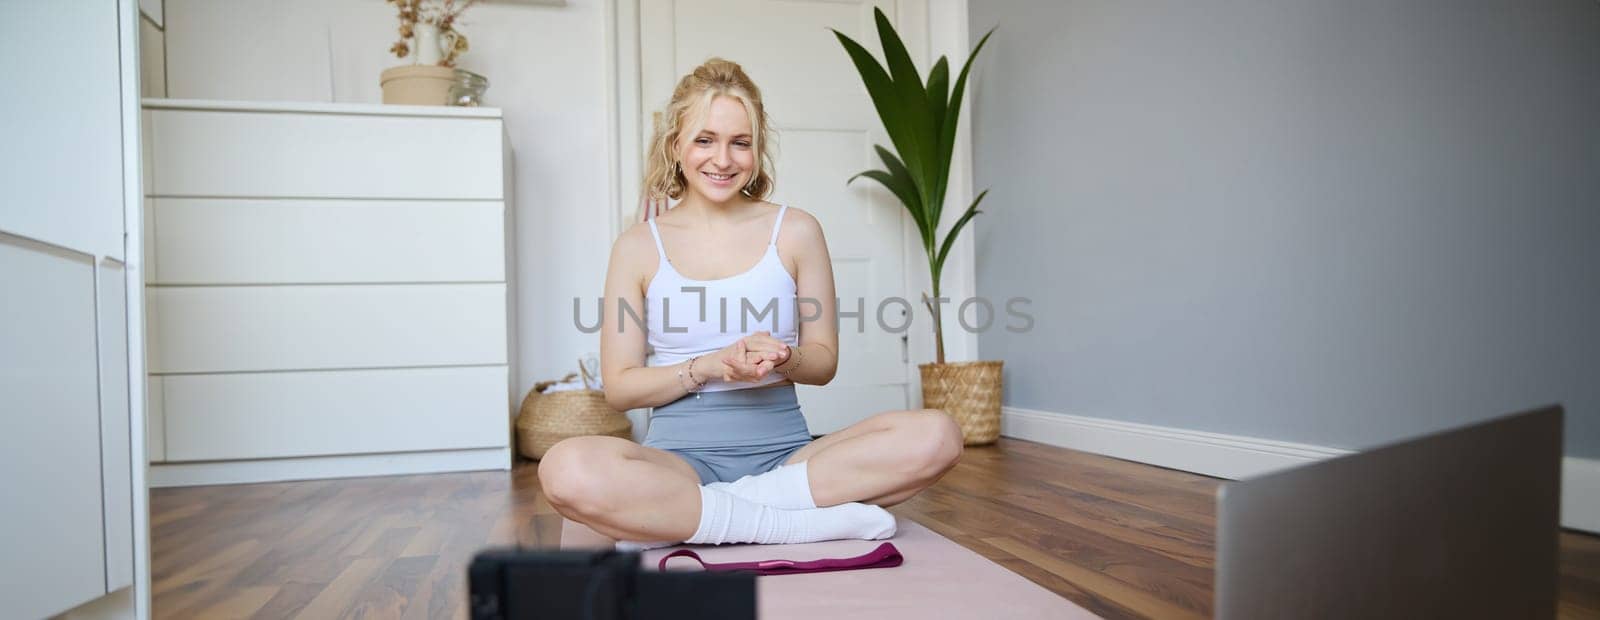 Portrait of young charismatic fitness trainer, girl blogger records video on digital camera, talks about health and workout, doing exercises on rubber mat in a room at home.